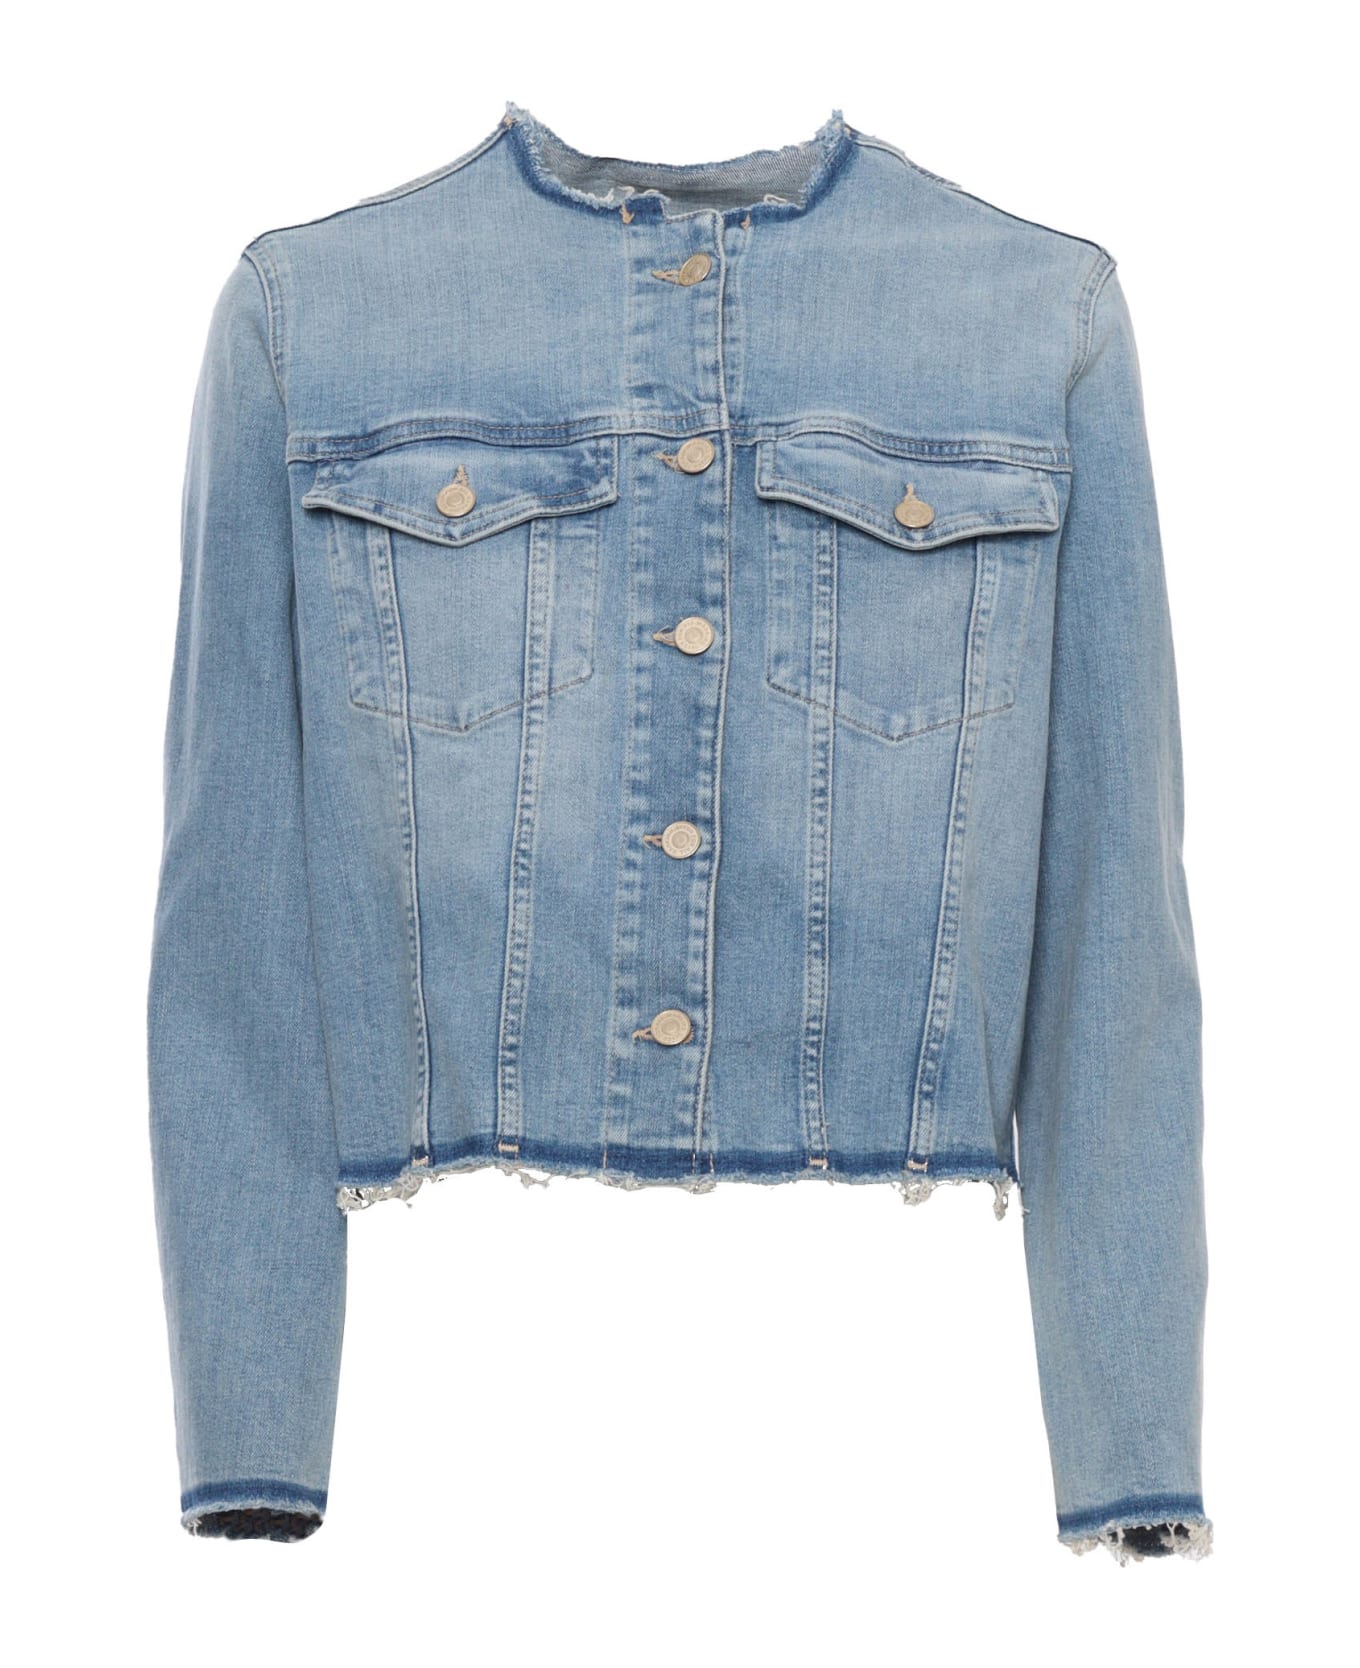 7 For All Mankind Coco Denim Jacket - BLUE